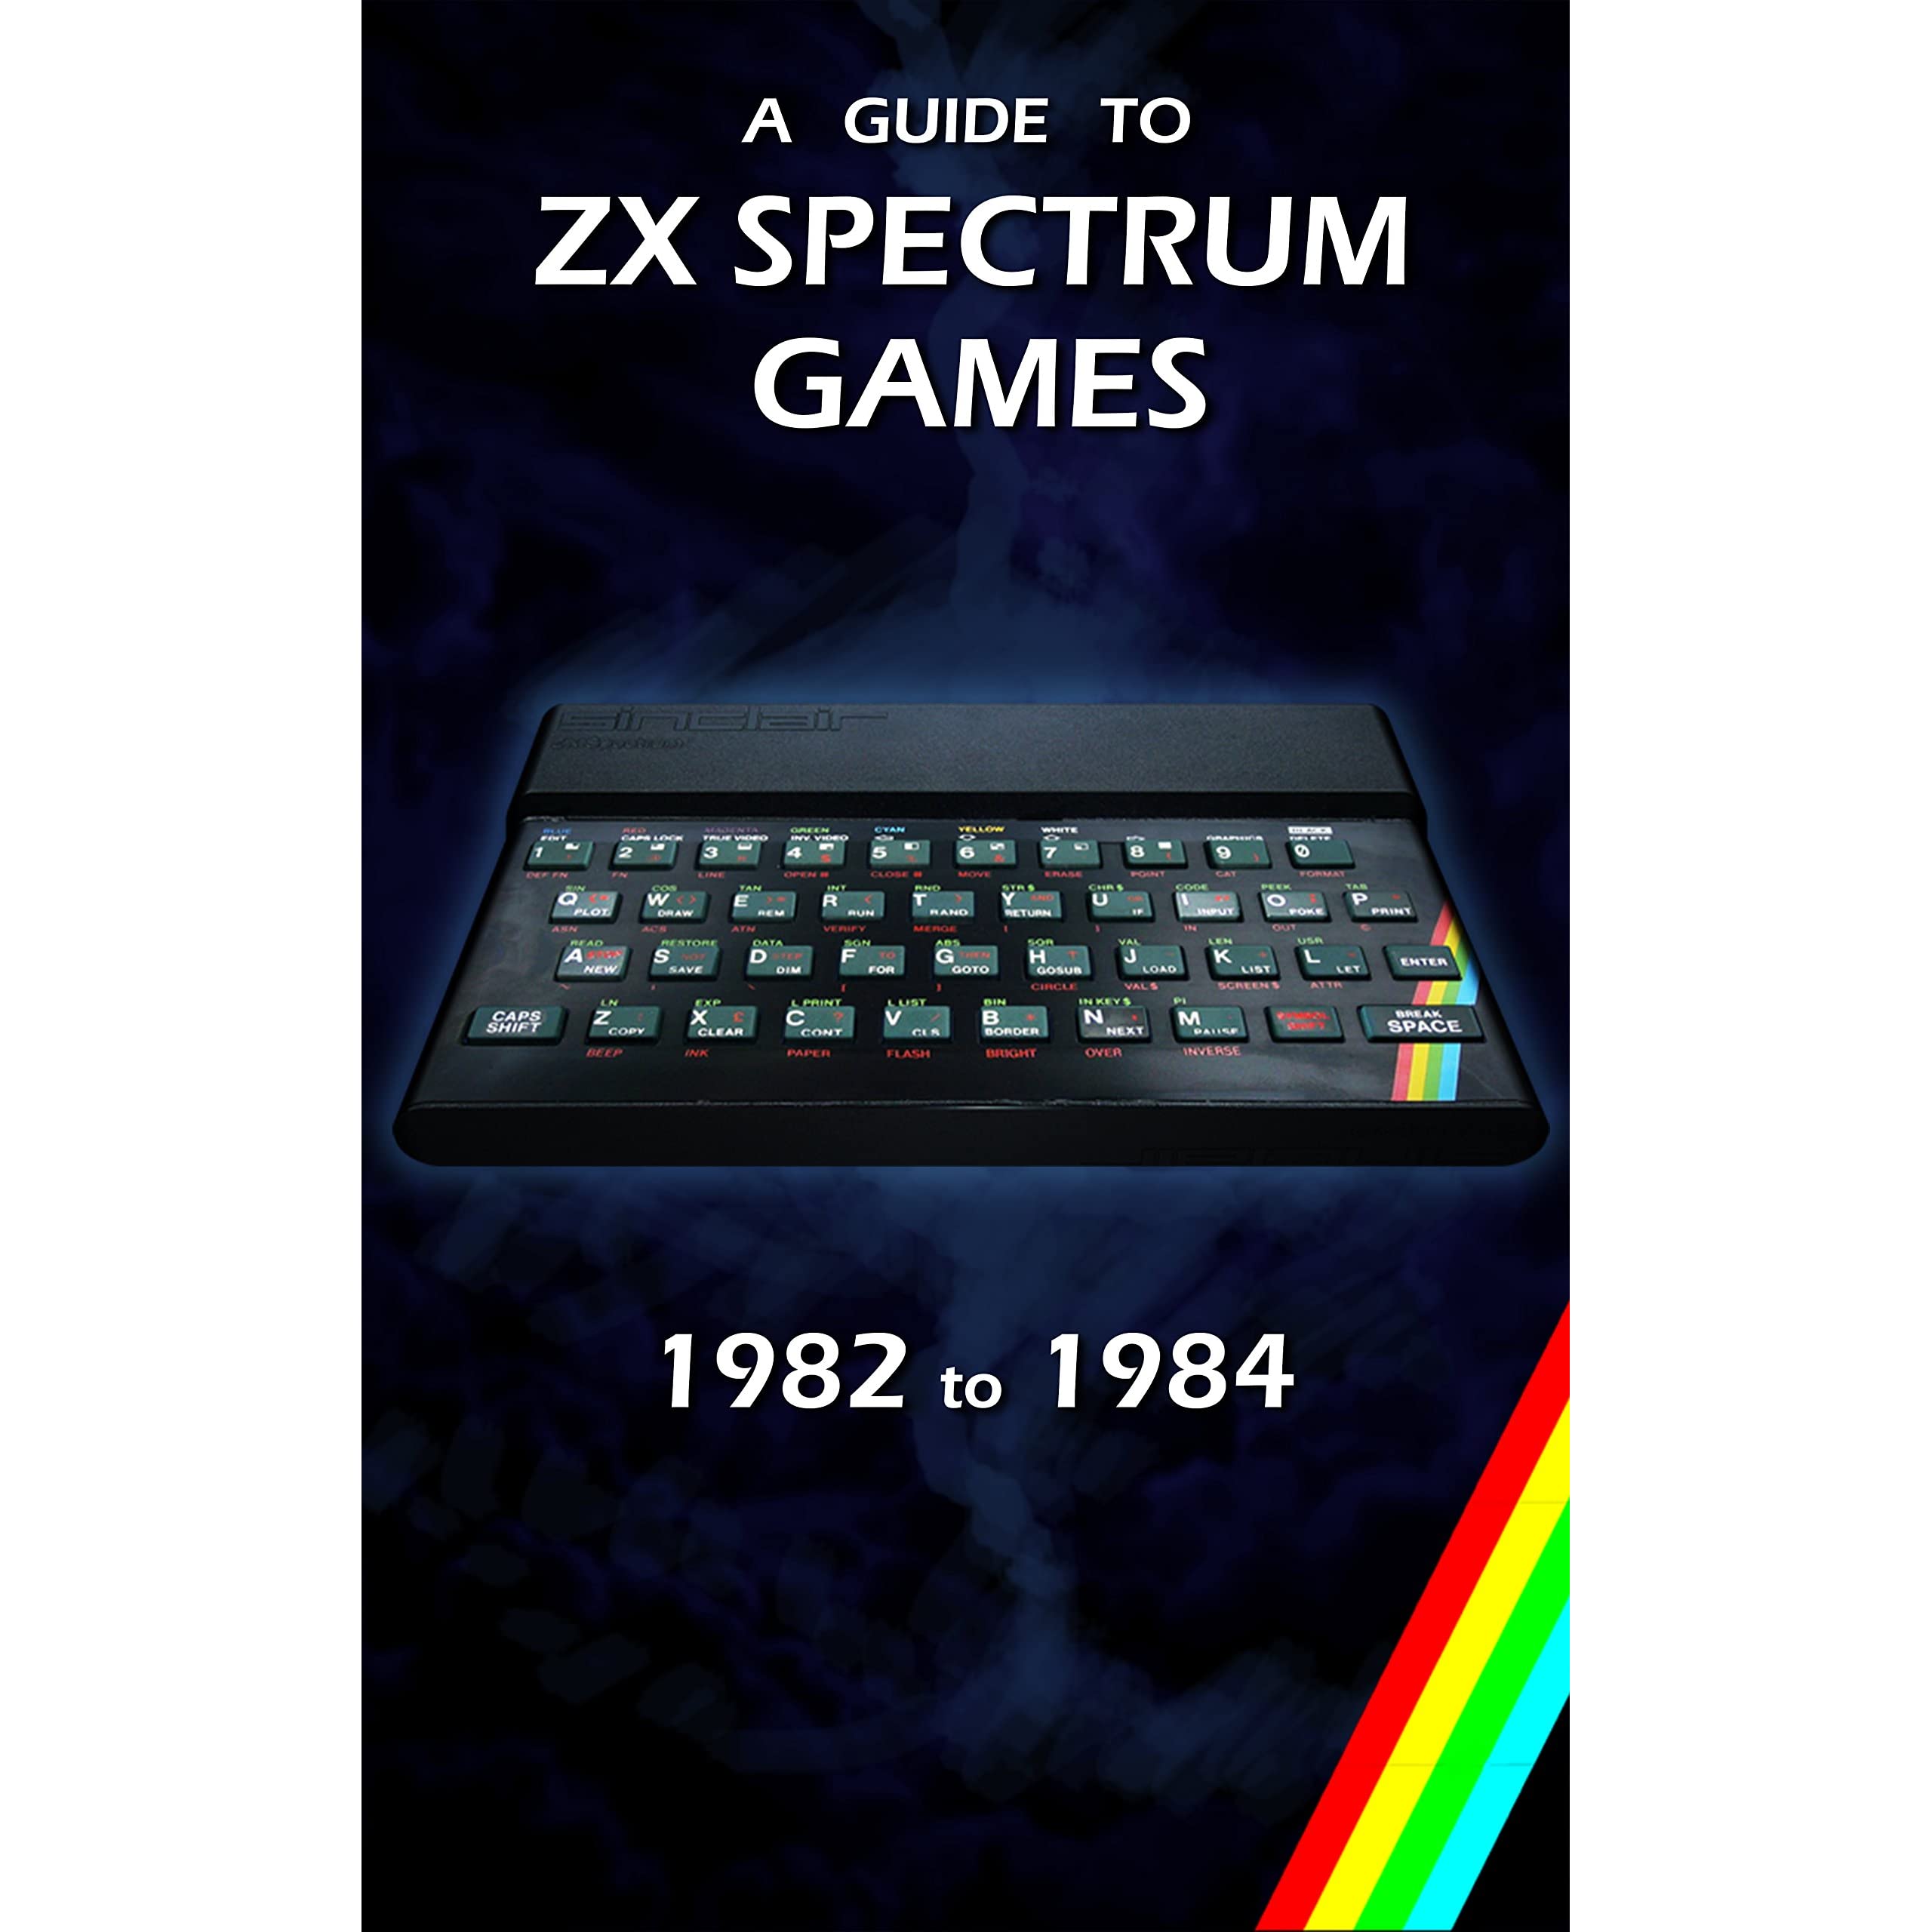 A Guide to ZX Spectrum Games to 1984